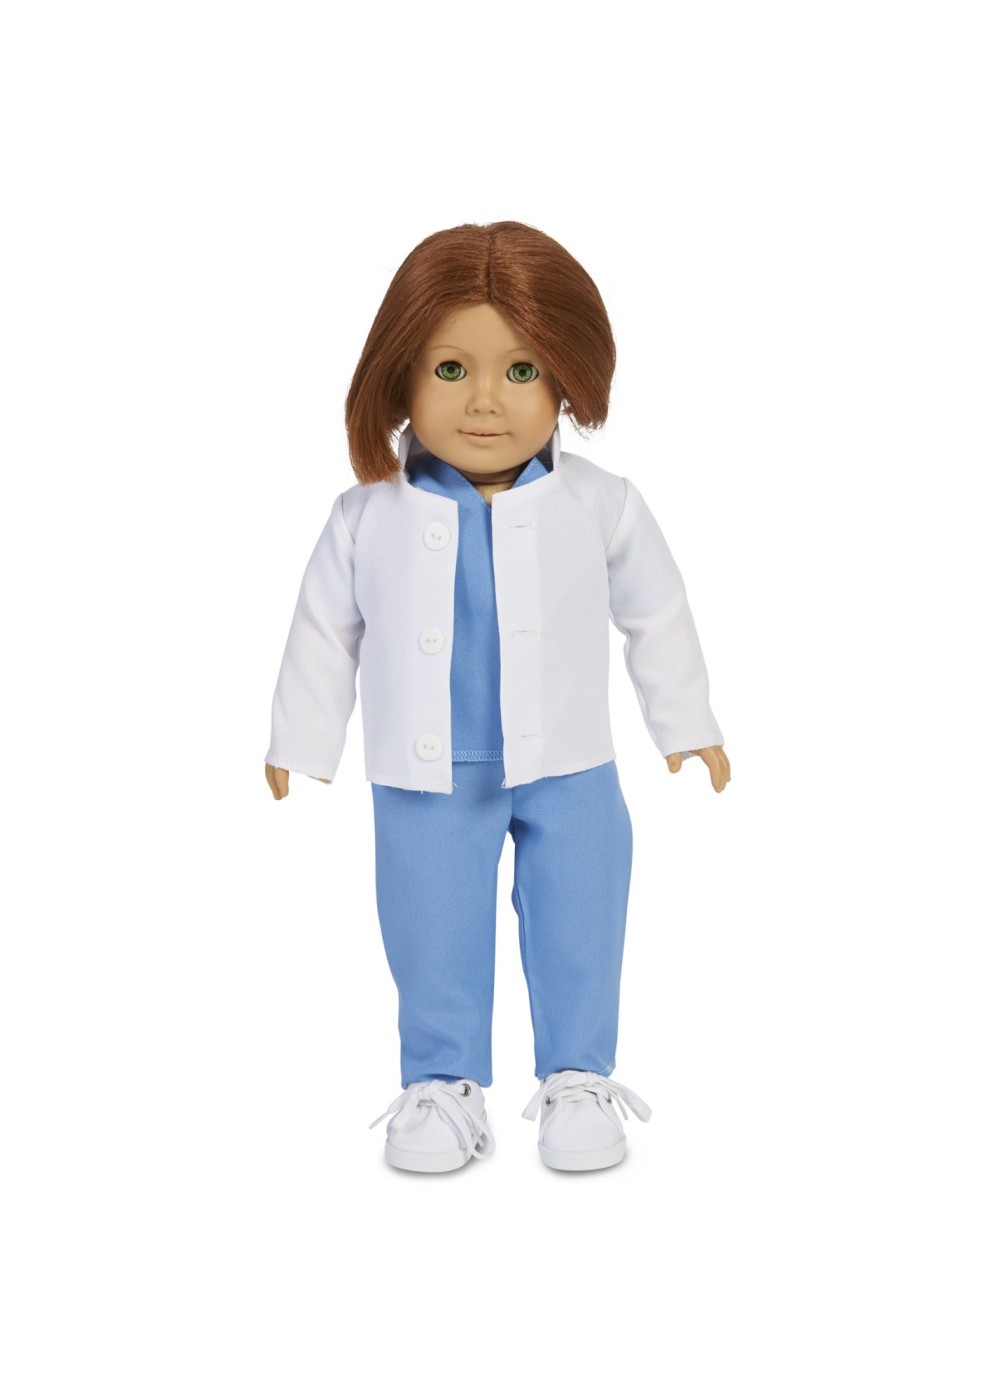 Kids Professional Doctor Doll Costume